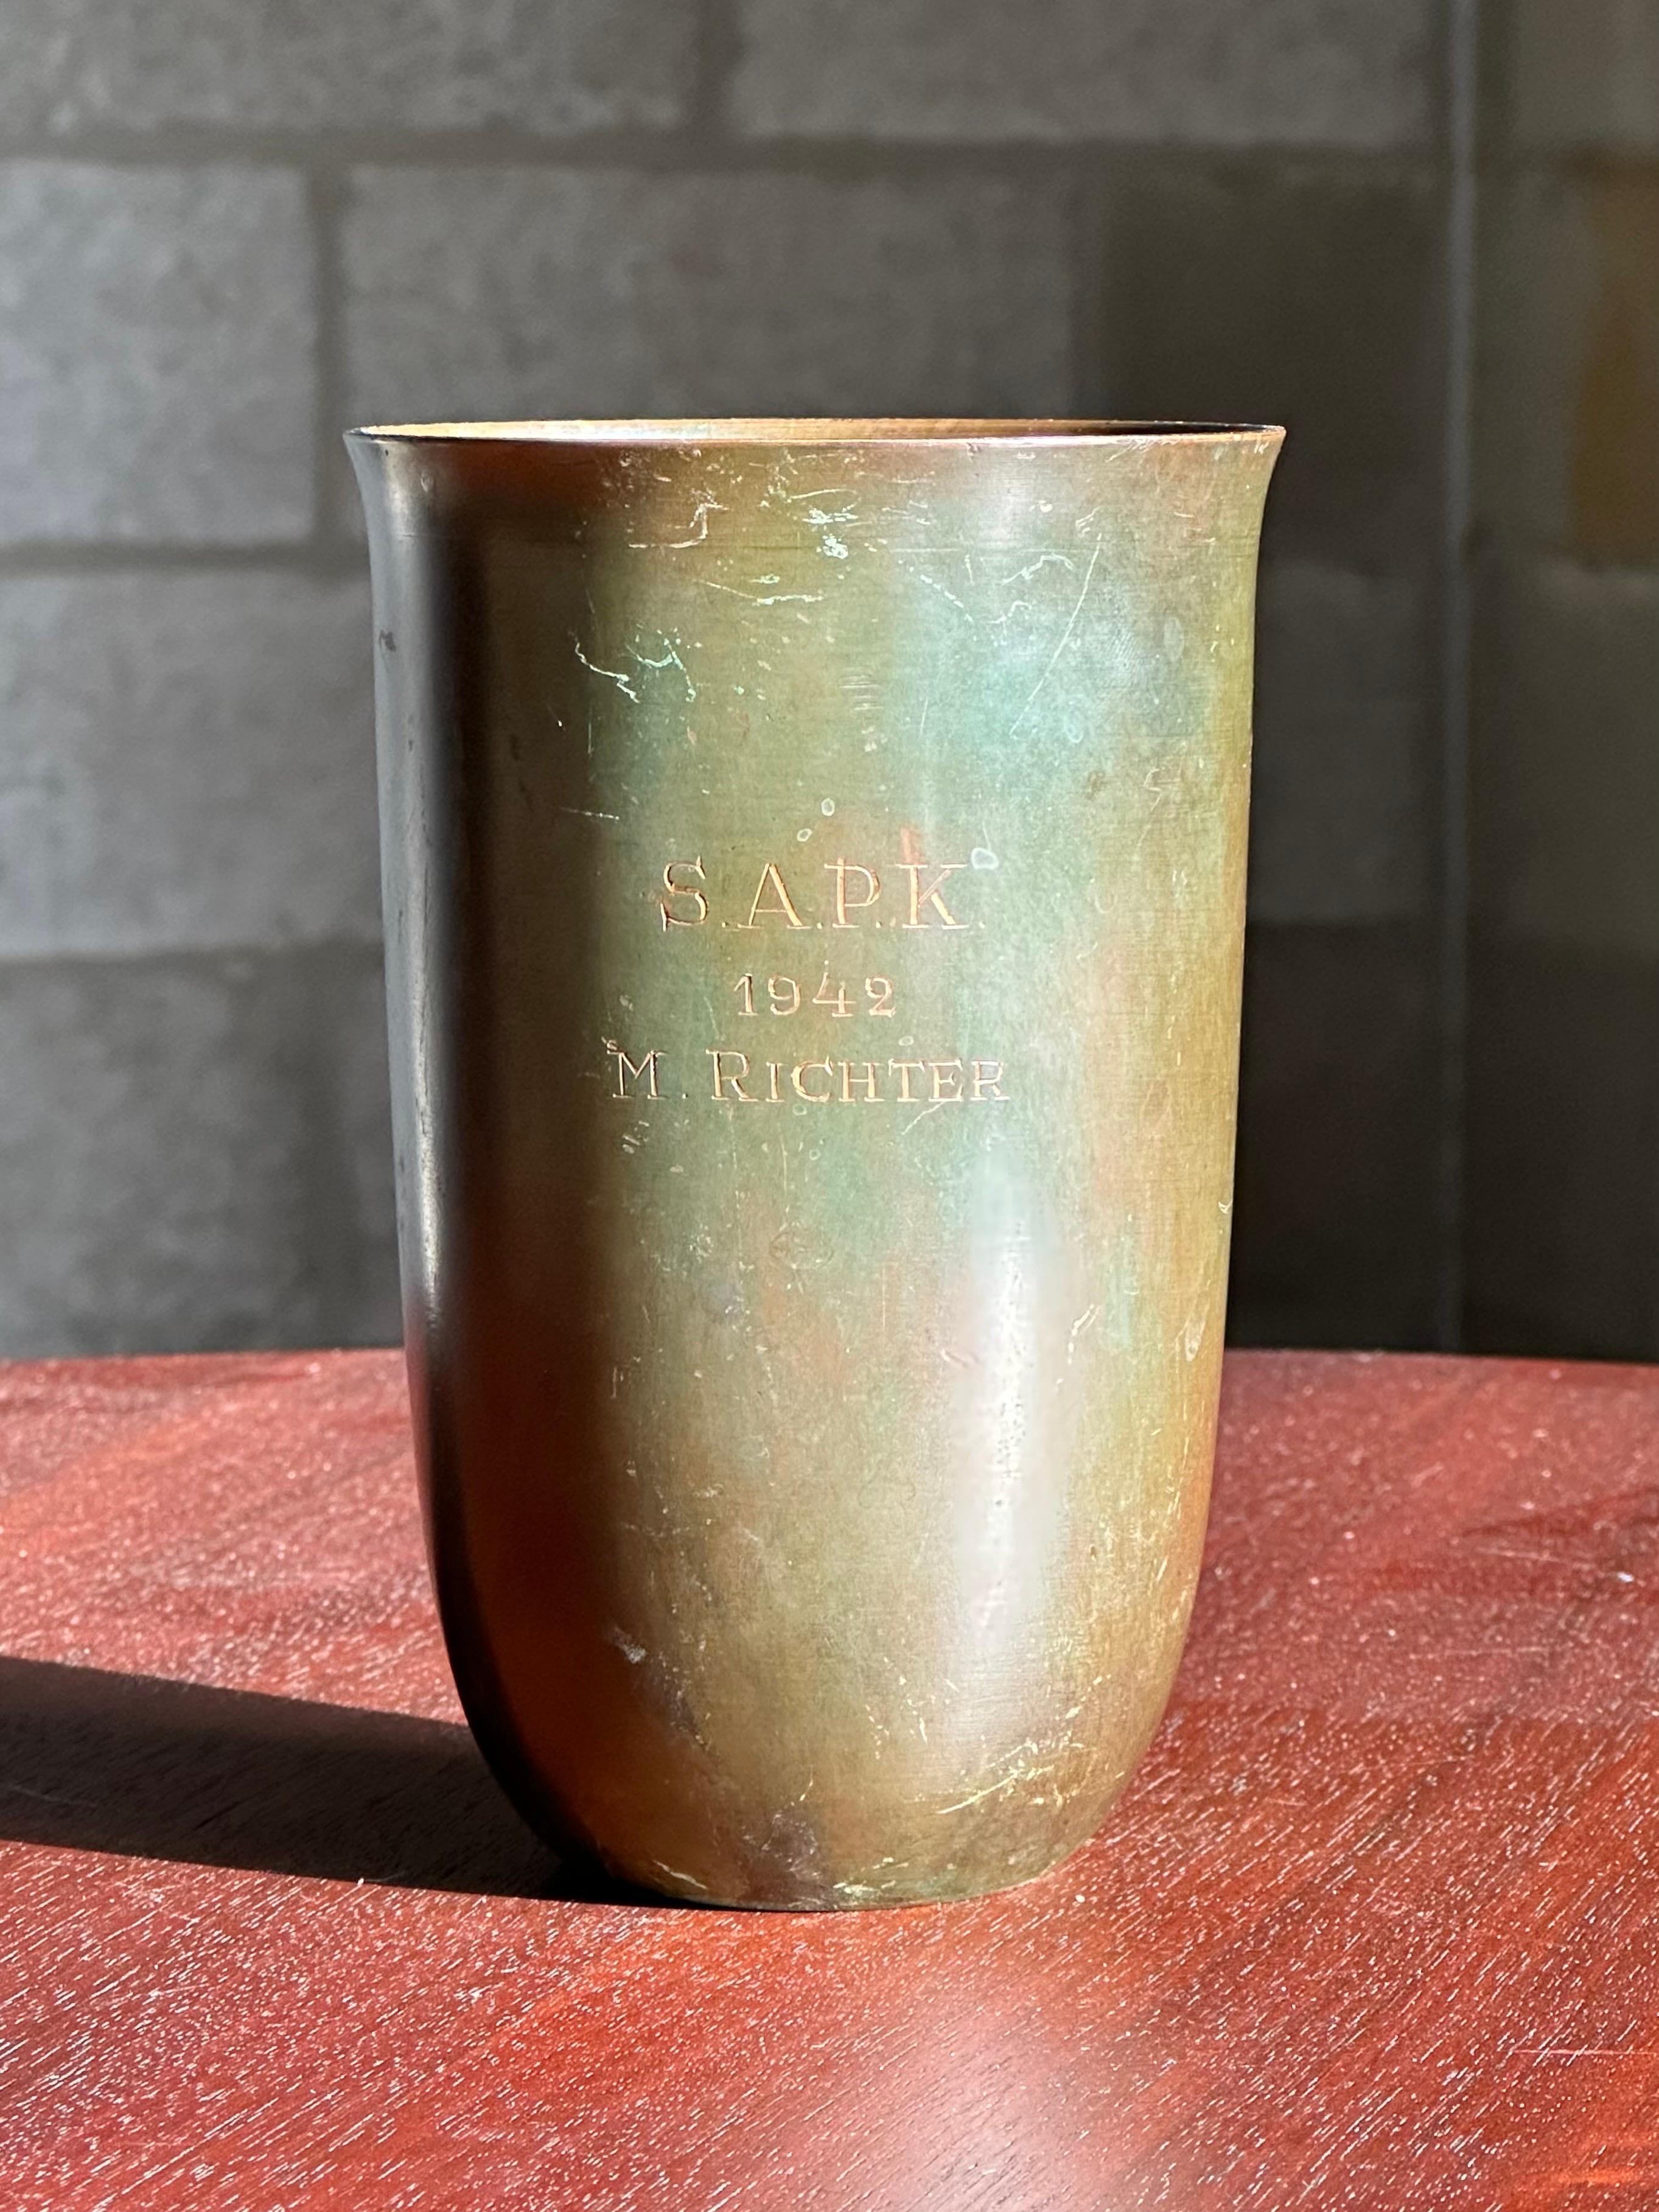 A beautiful art deco vase produced by GAB, Guldsmedsaktiebolaget circa 1940s. Appearing to have been enagraved at some point. Great patina throughout- please reference photos for color accuracy. The darker pictures depict the vase in a well shaded